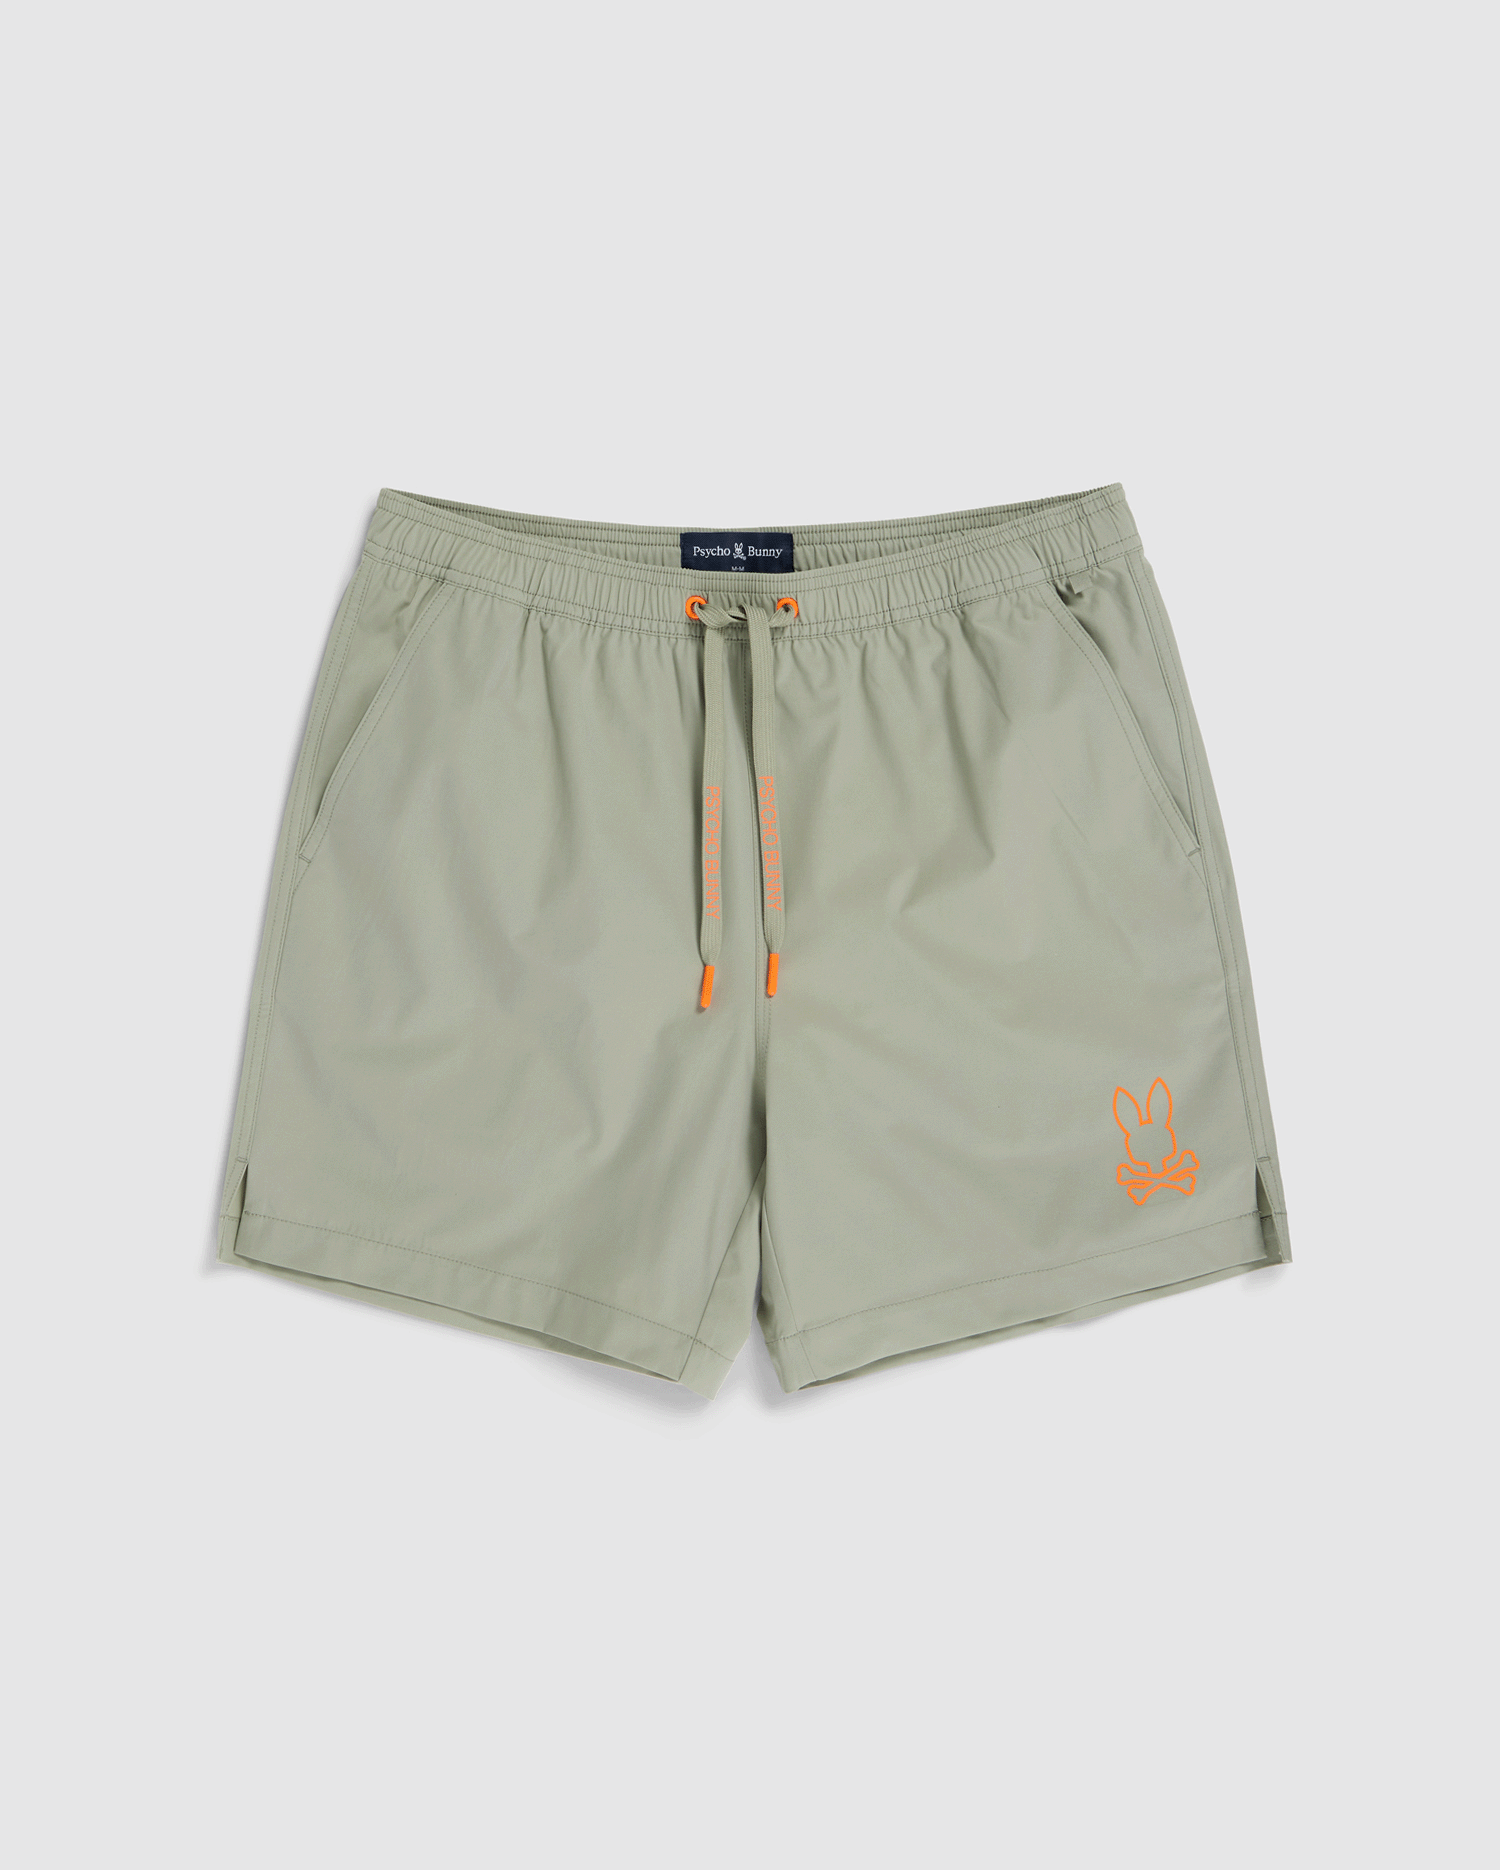 Light gray **MENS PARKER HYDROCHROMIC SWIM TRUNK - B6W646C200** with a drawstring waistband and orange accents. The quick-dry material ensures swift evaporation, making them ideal for swimming. Featuring a small, orange bunny logo on the lower left leg and a brand tag inside the waistband, these **Psycho Bunny** shorts offer both style and functionality.